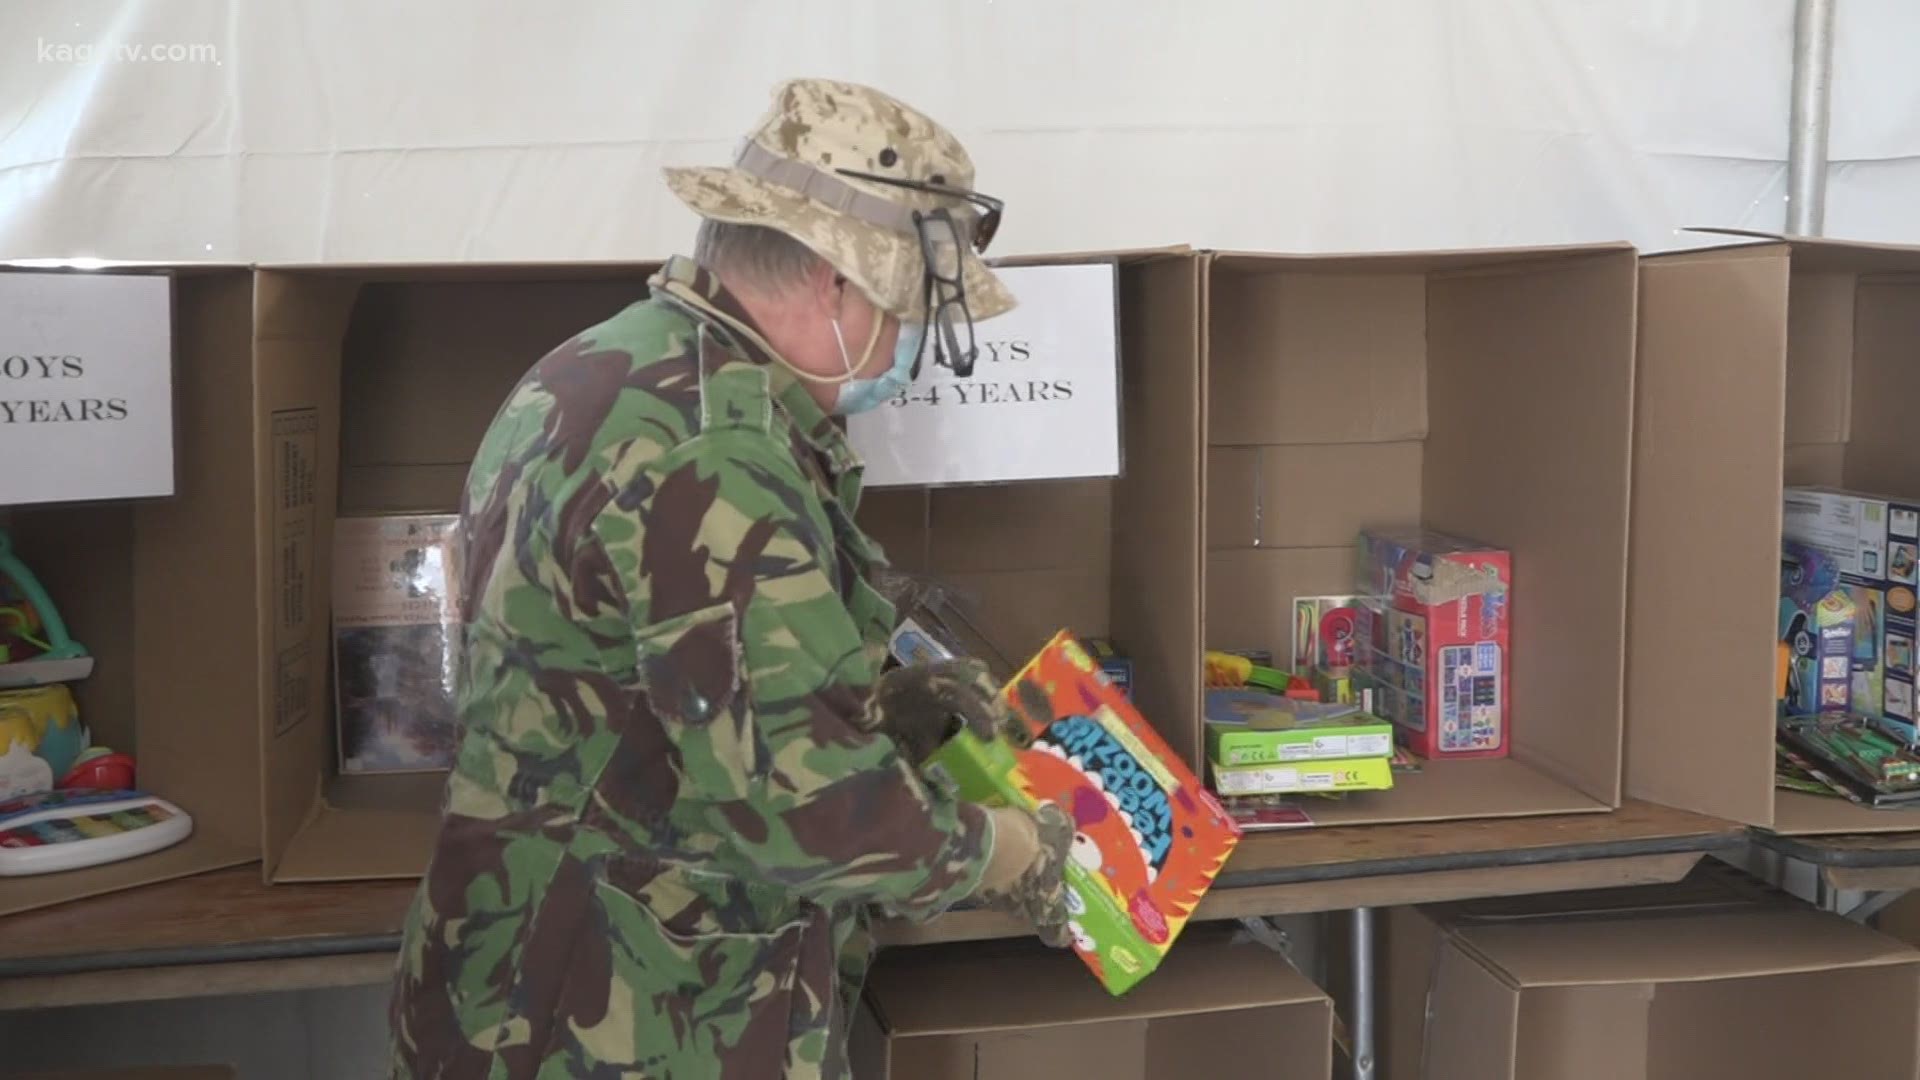 The annual Radio M*A*S*H Toy Drive kicked off Thursday. The event asks the community to donate and volunteer to collect new toys and cash donations.